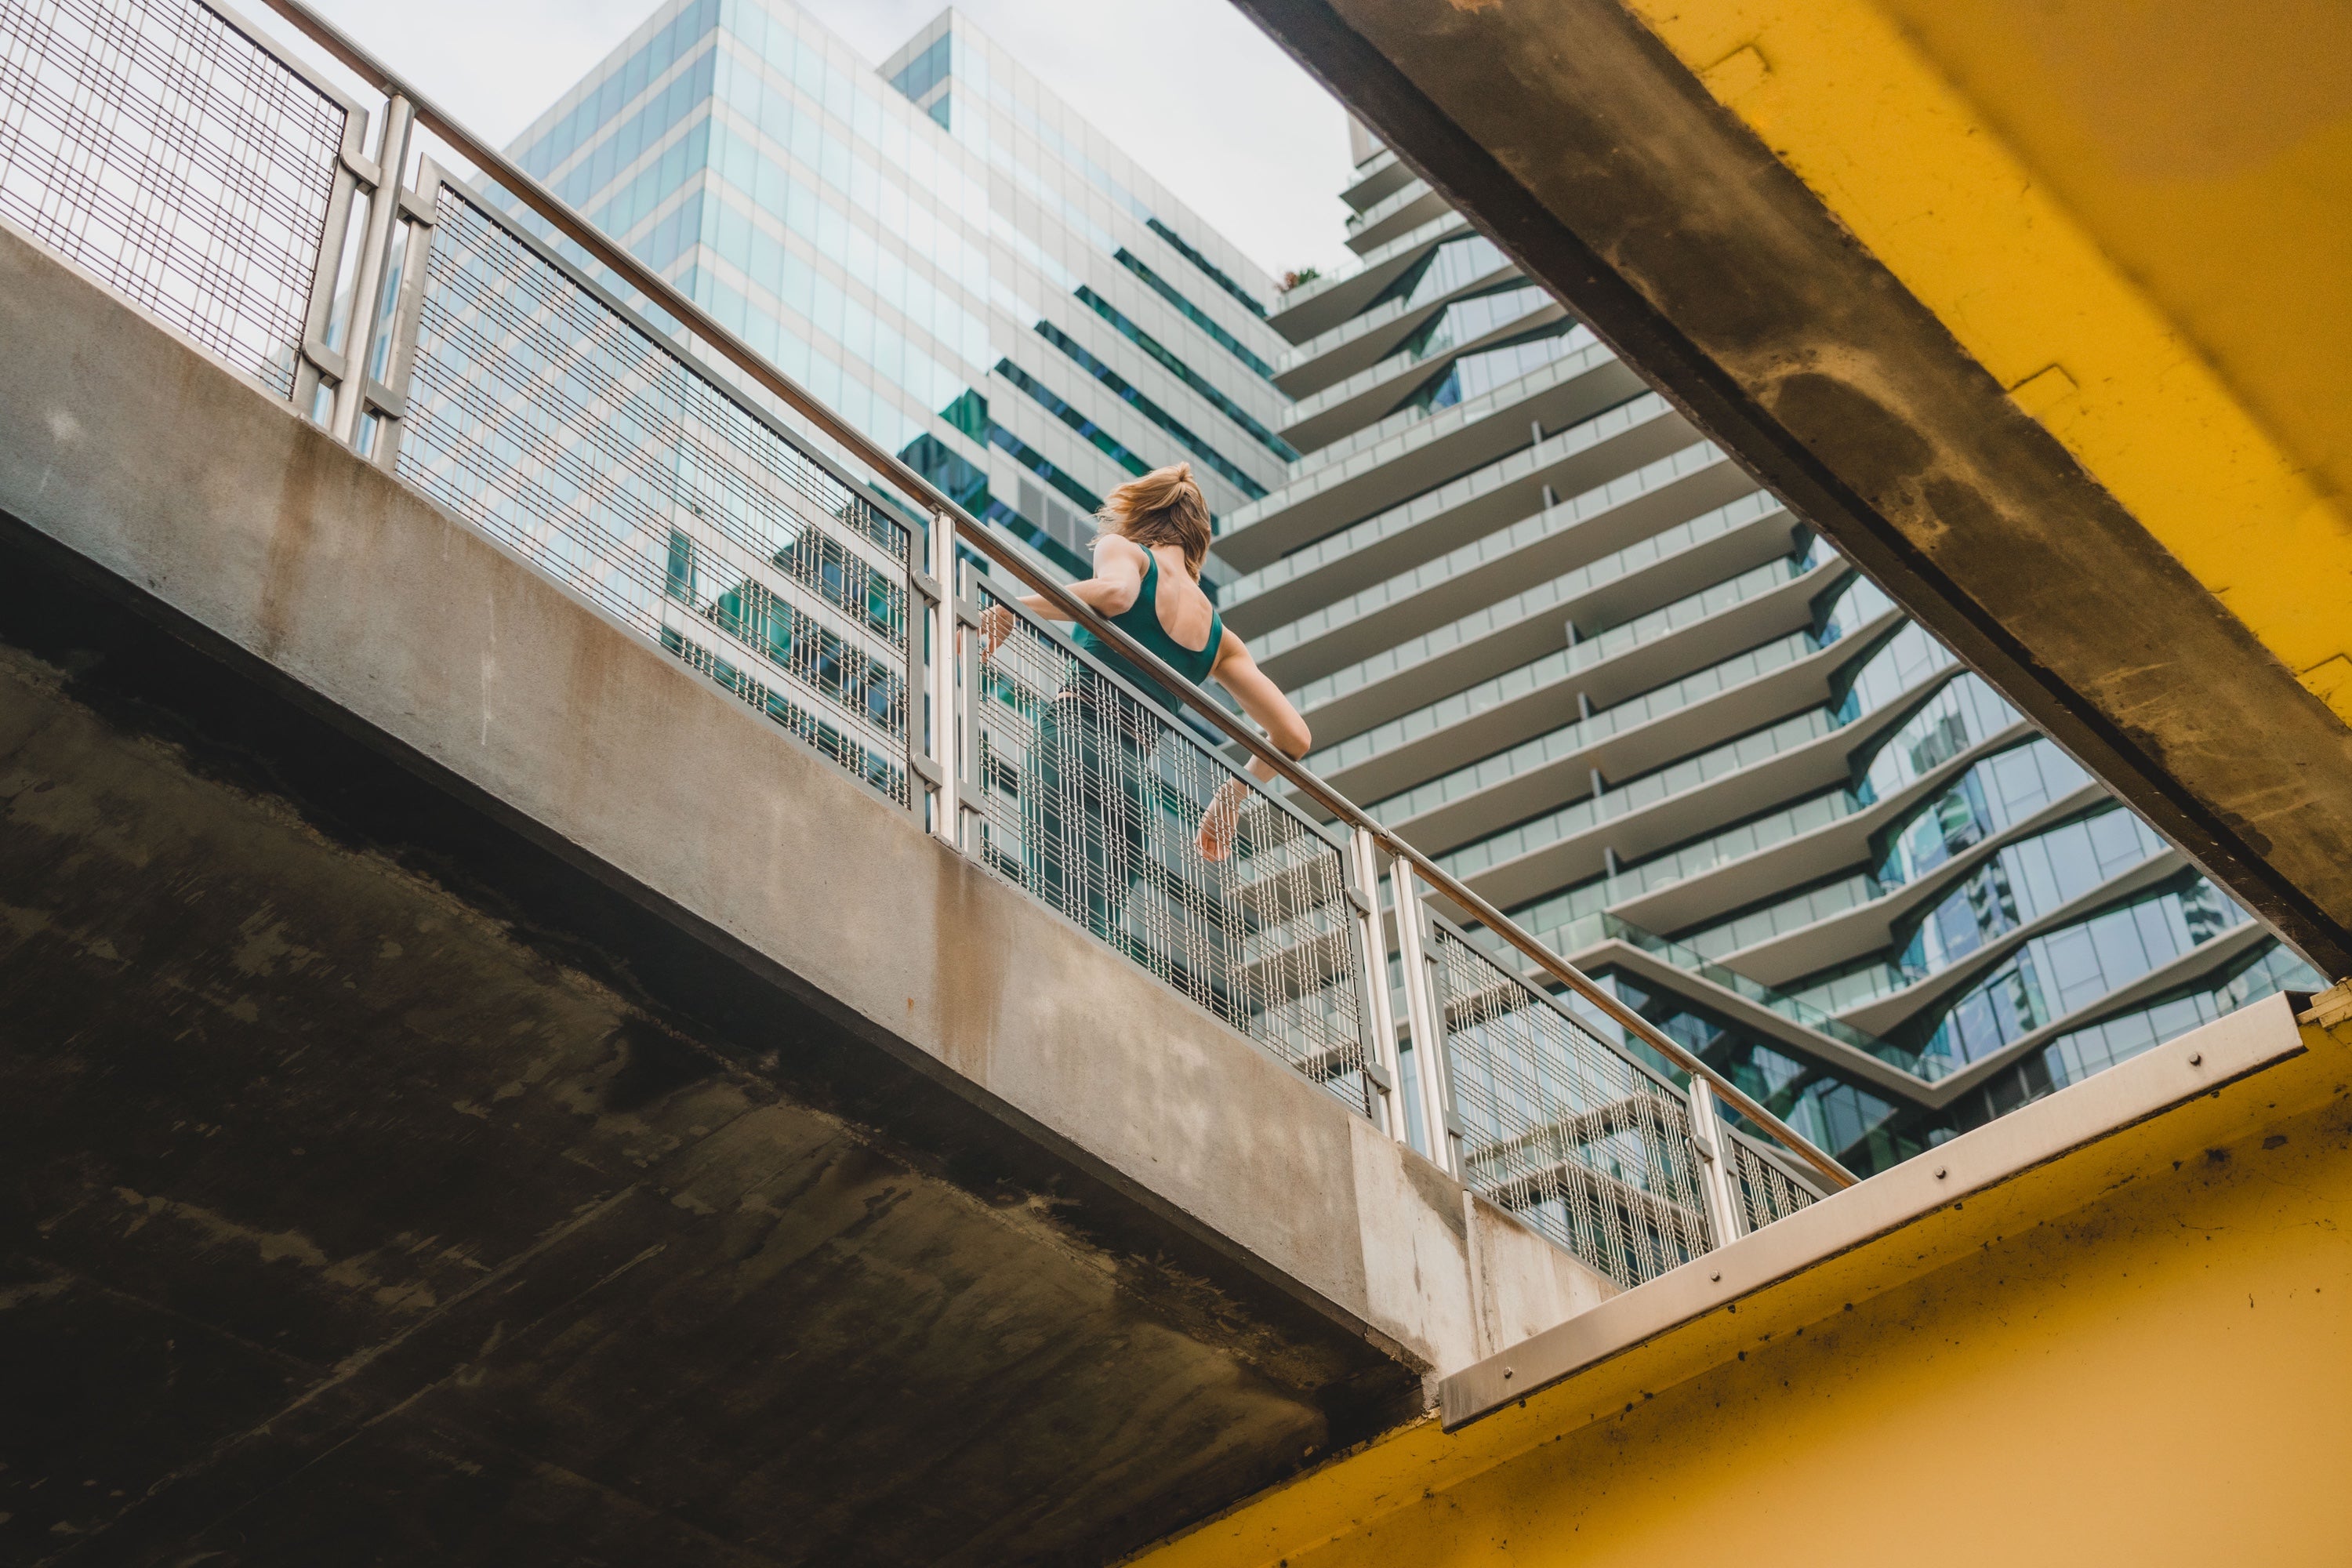 Image from a level down looking up to model leaning on railing in green leggings and bra top. City sky scape behind.